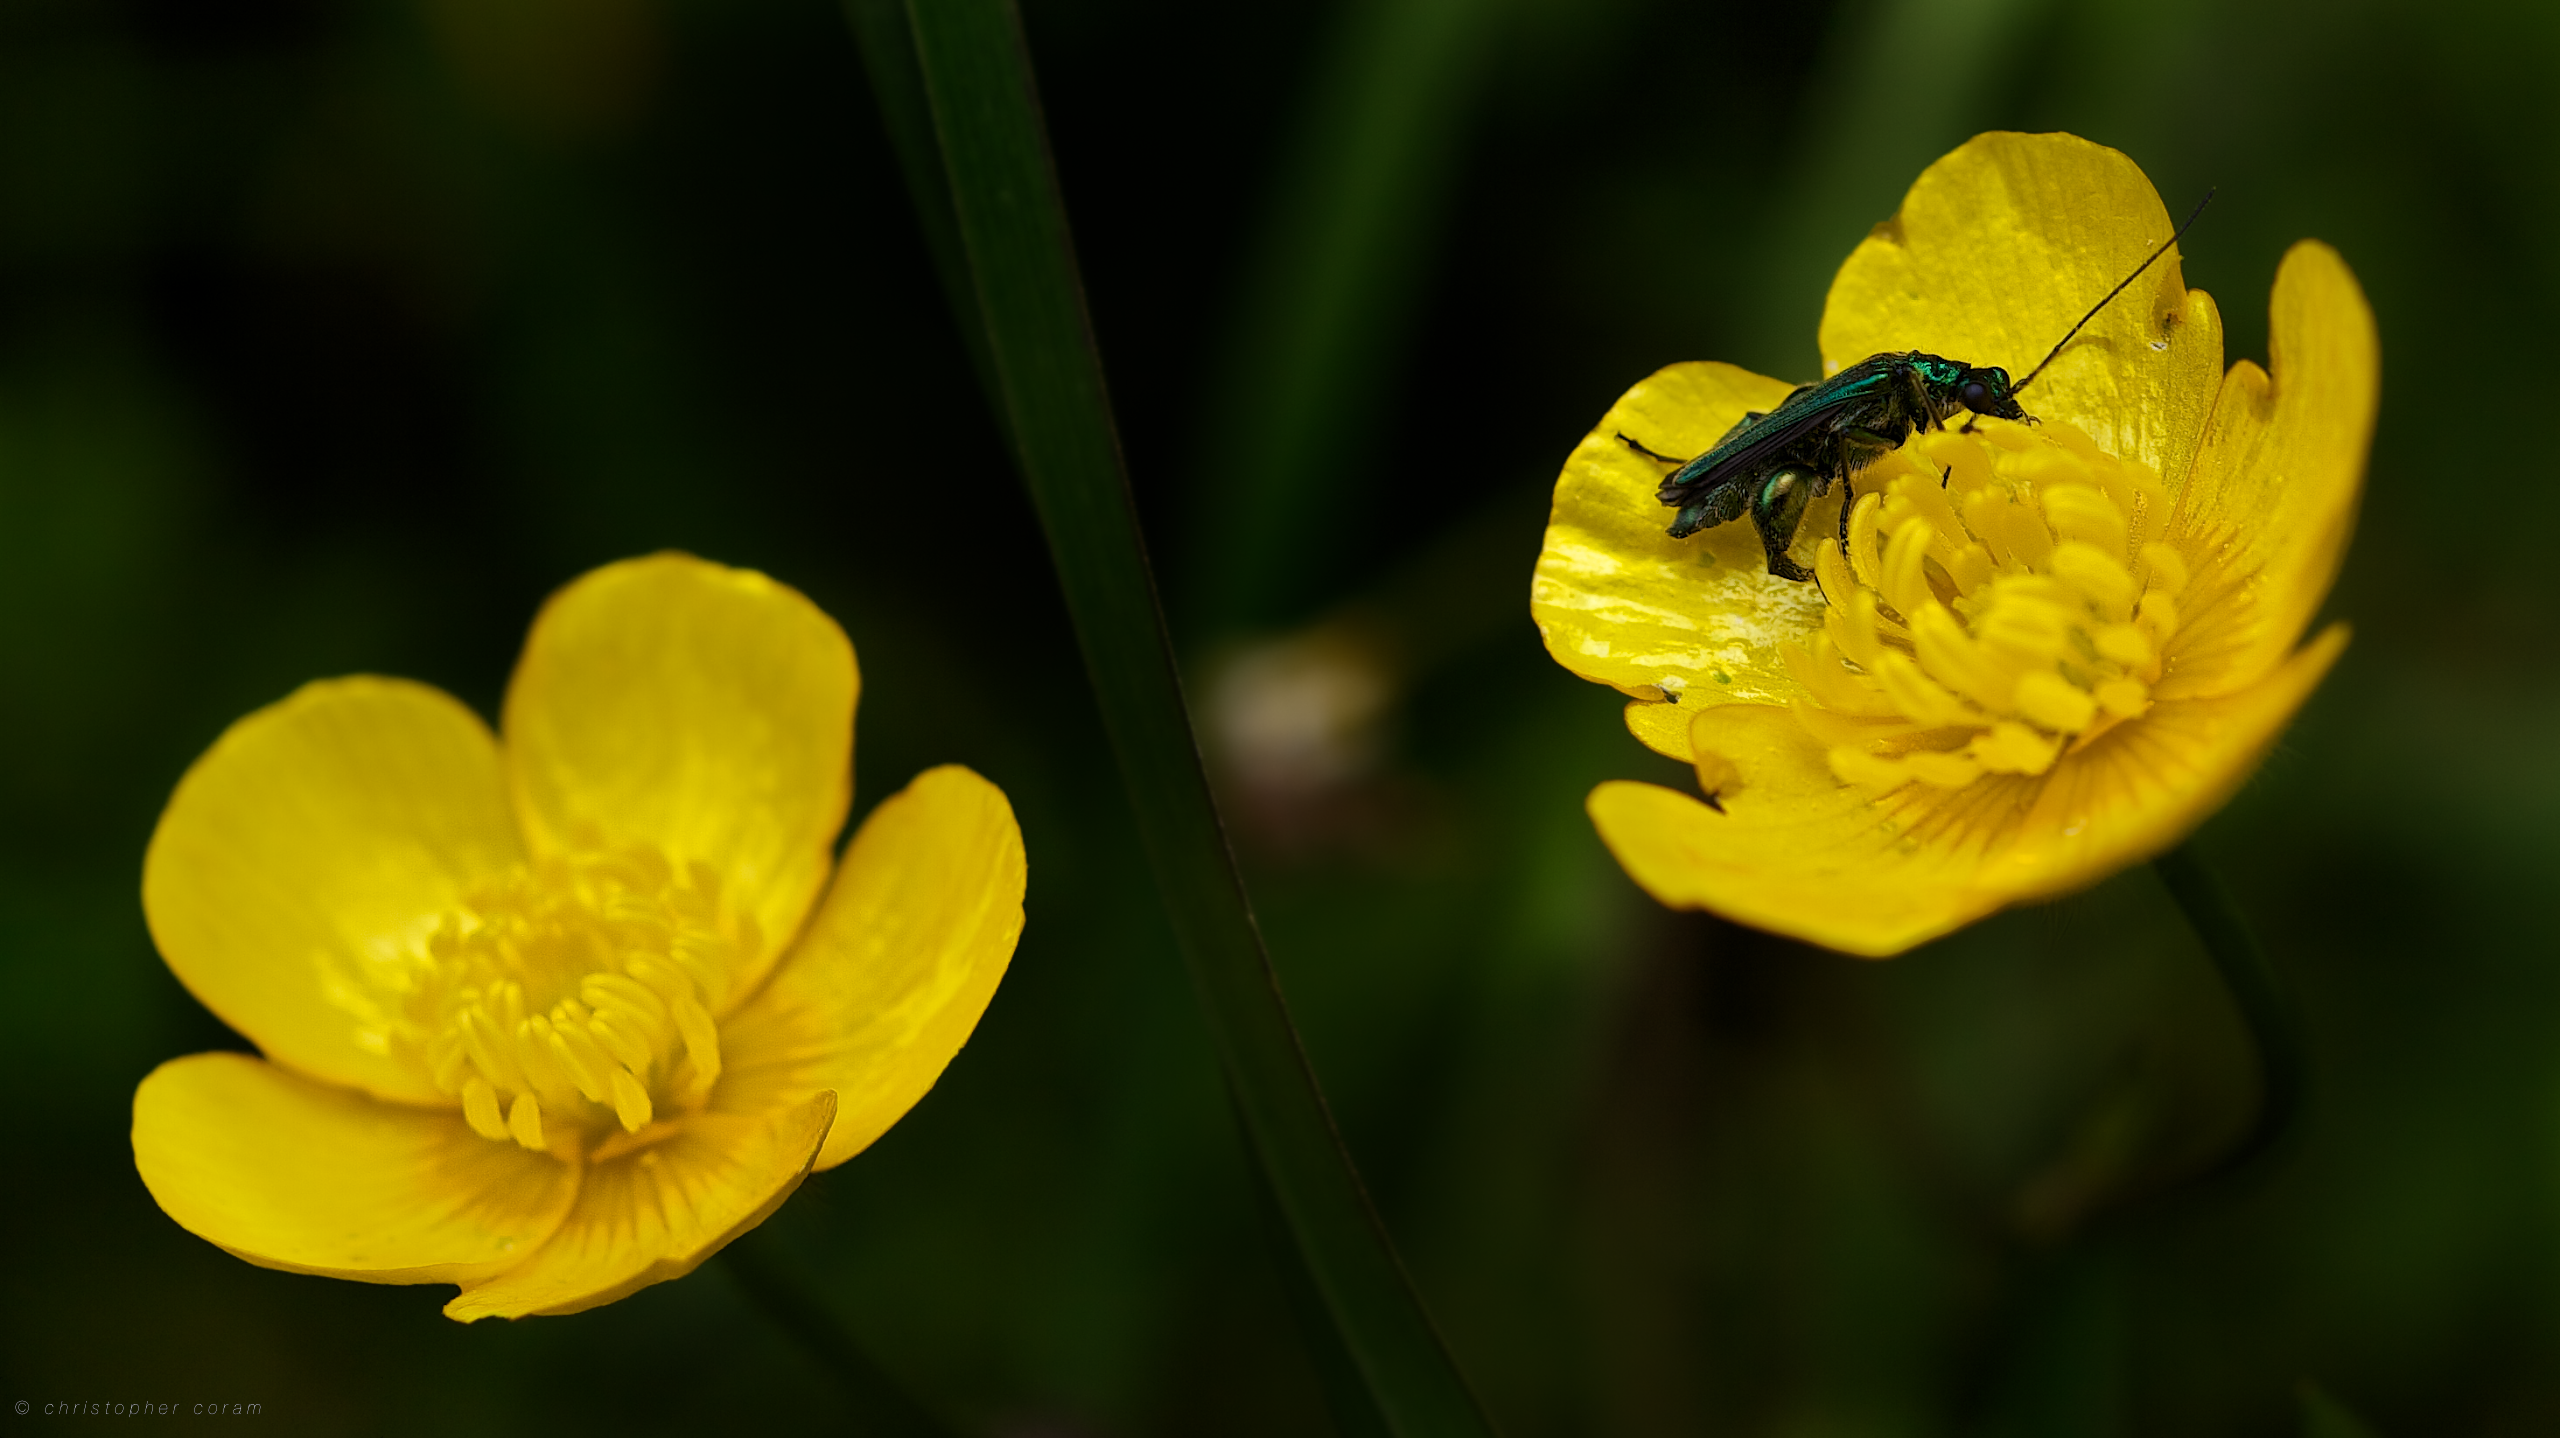 Buttercup Bug by Crysophilax